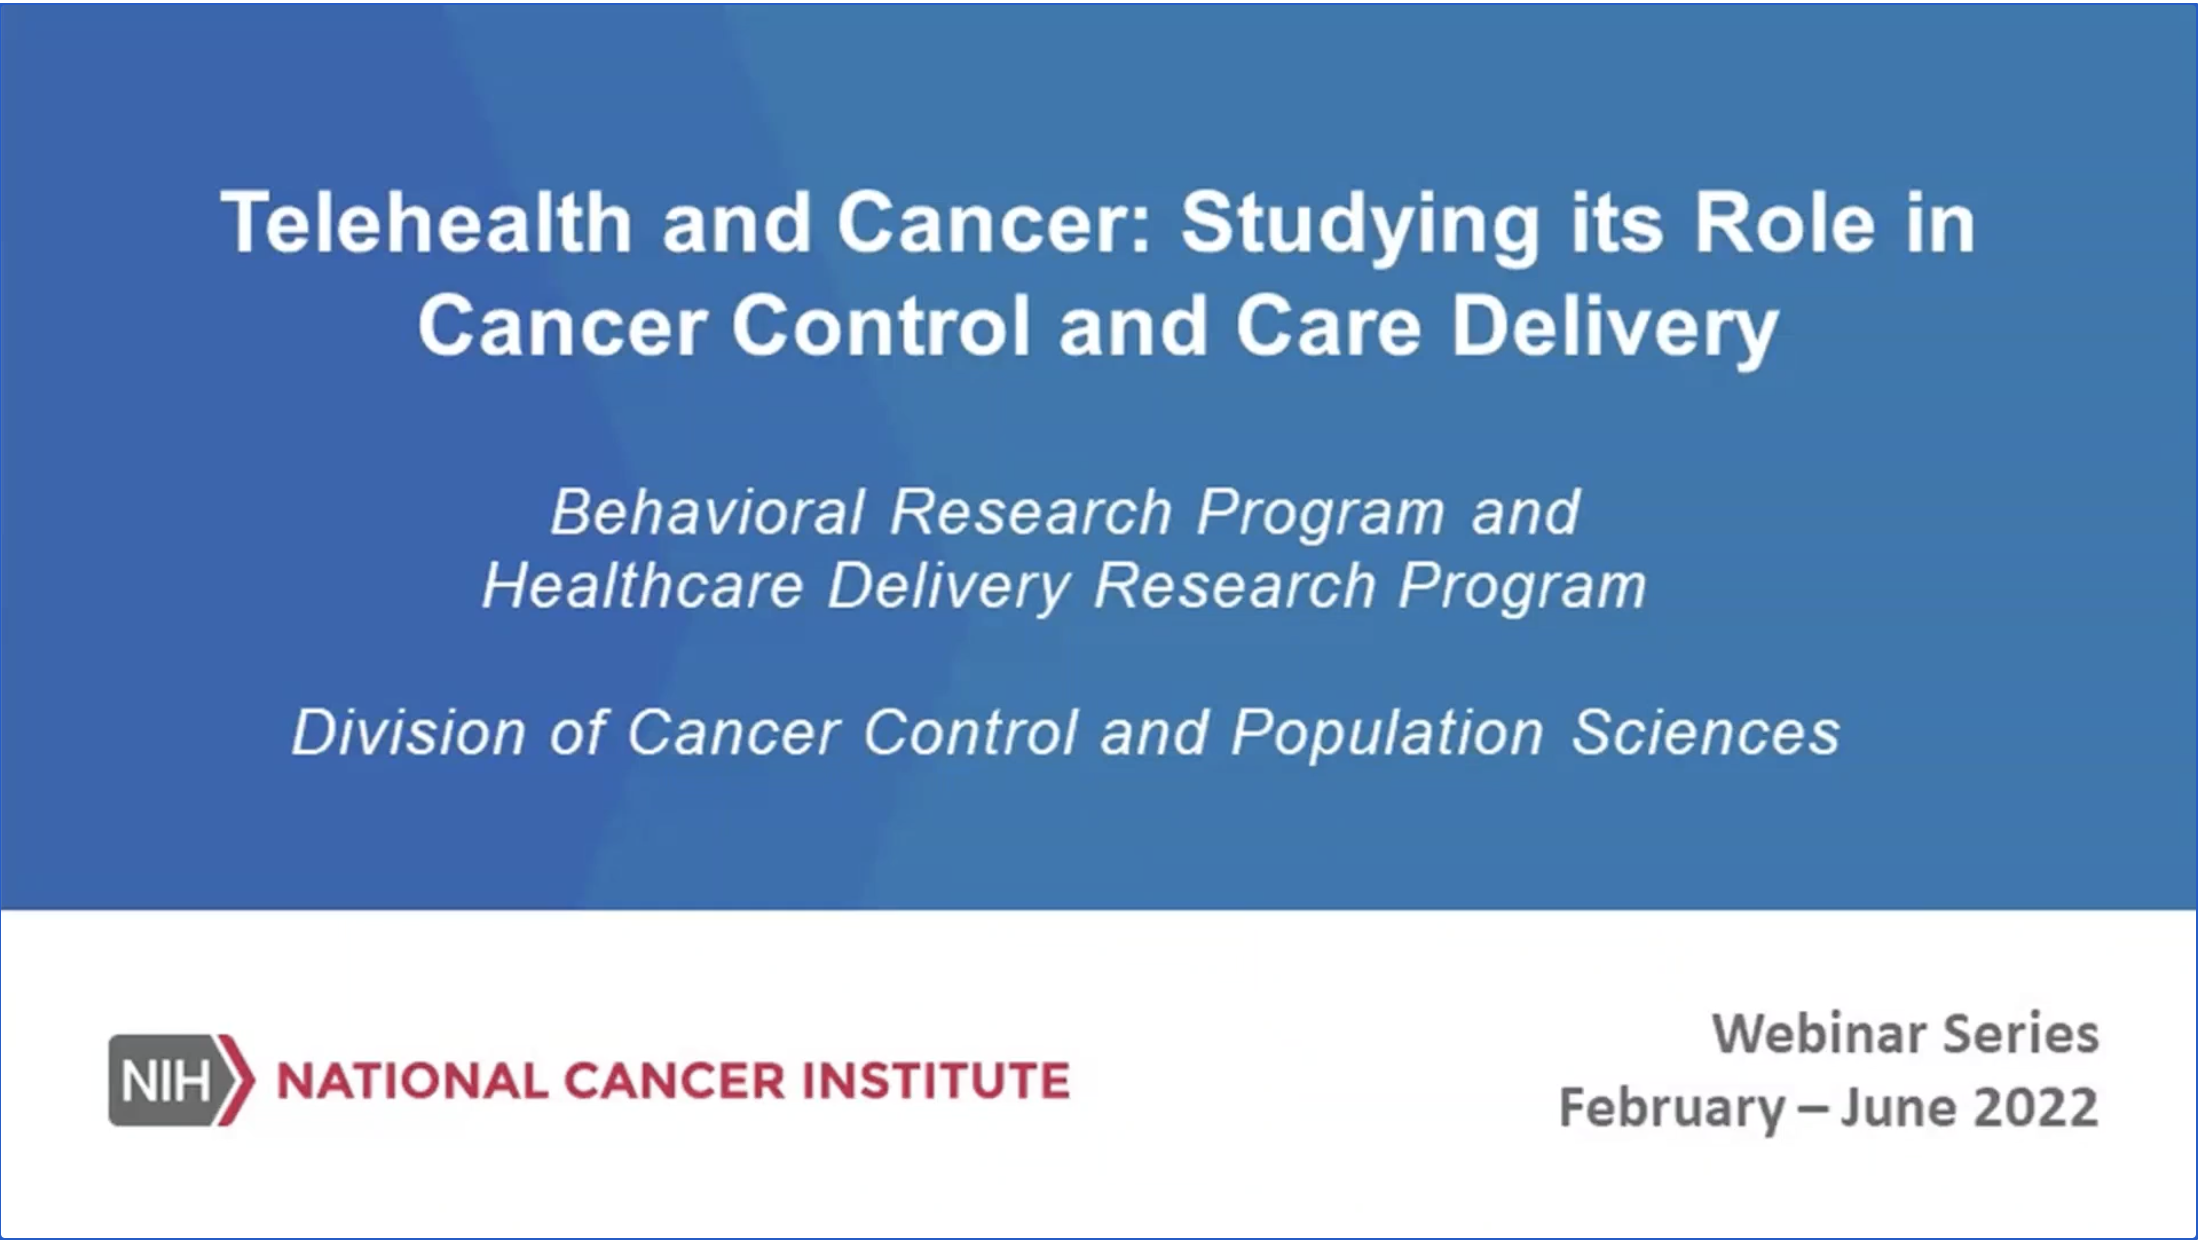 NCI Patient-provider communication and cancer-related telehealth seminar screenshot.